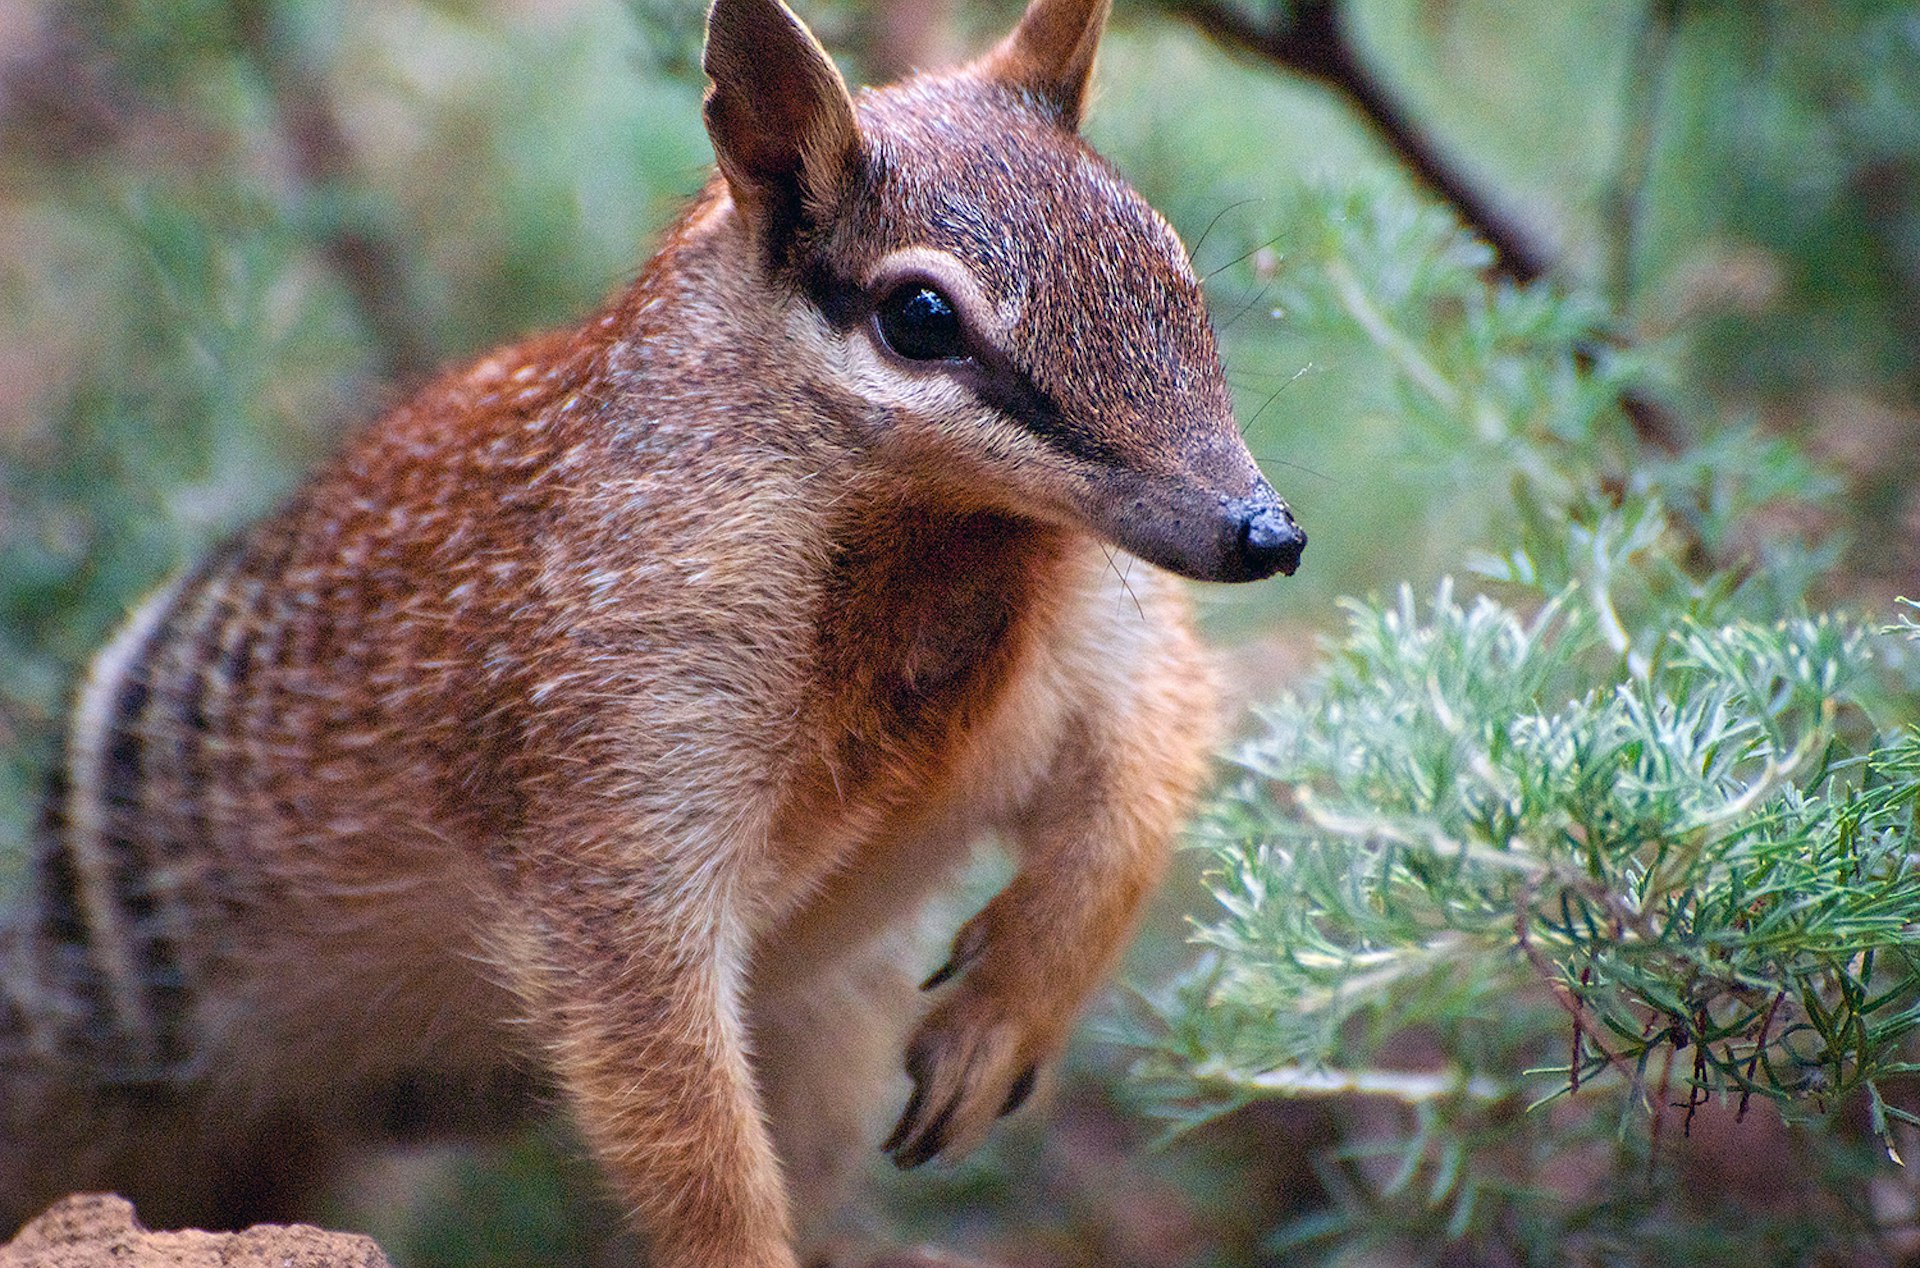 Tread quietly for a chance of spotting this striped-adorned (and adorable) West Australia native, the numbat. Image by dillettantiquity / CC BY-SA 2.0